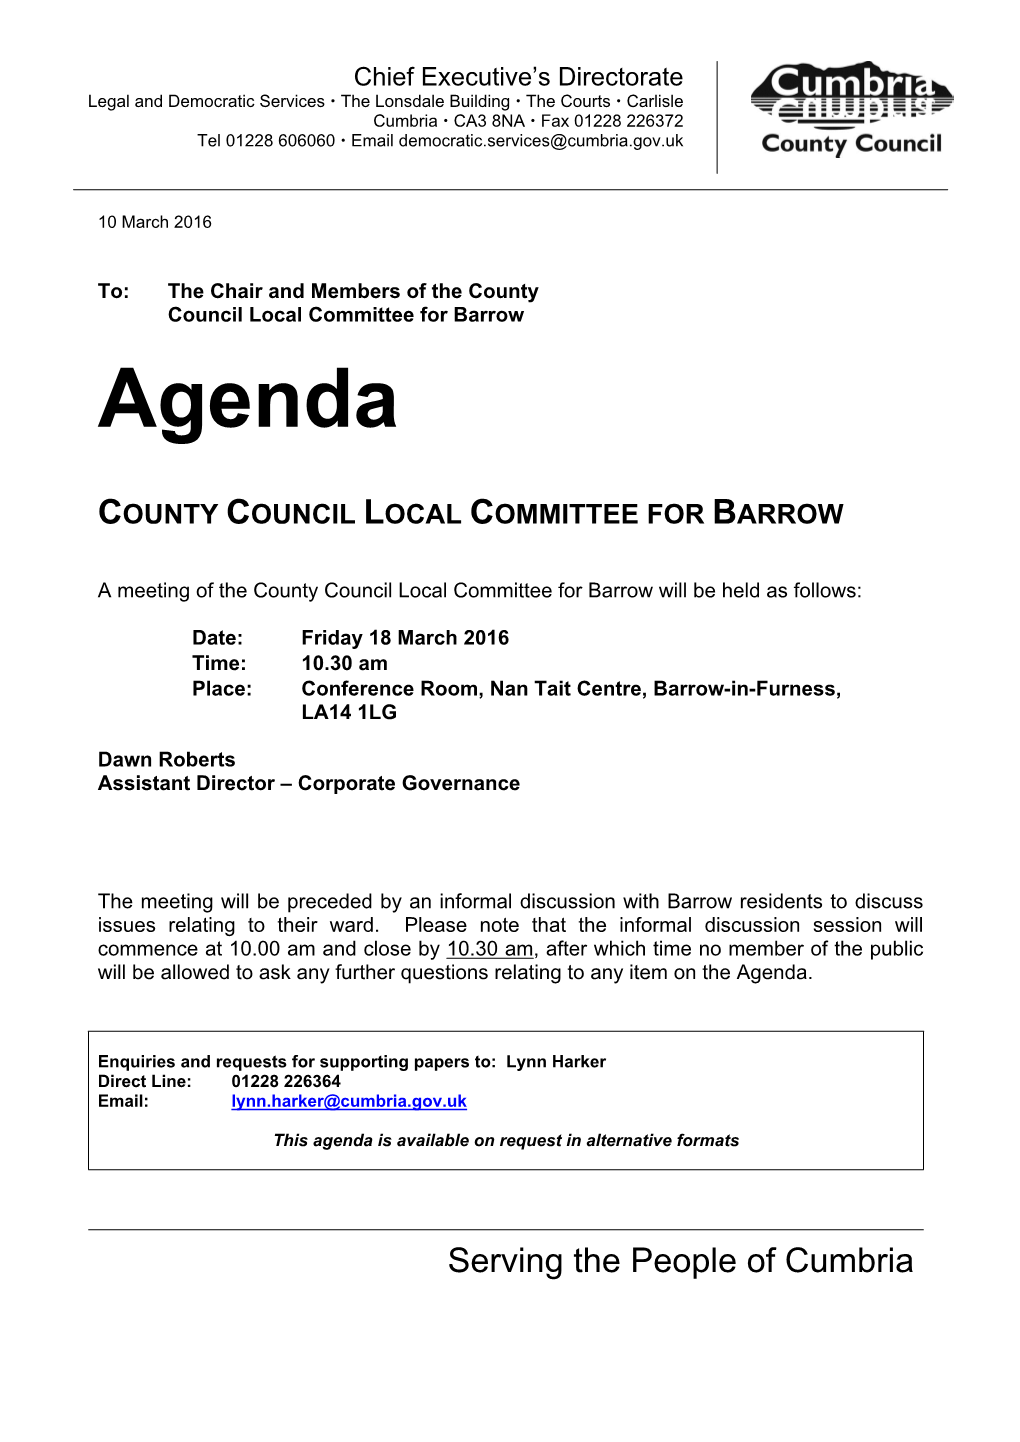 Agenda Document for County Council Local Committee for Barrow, 18/03